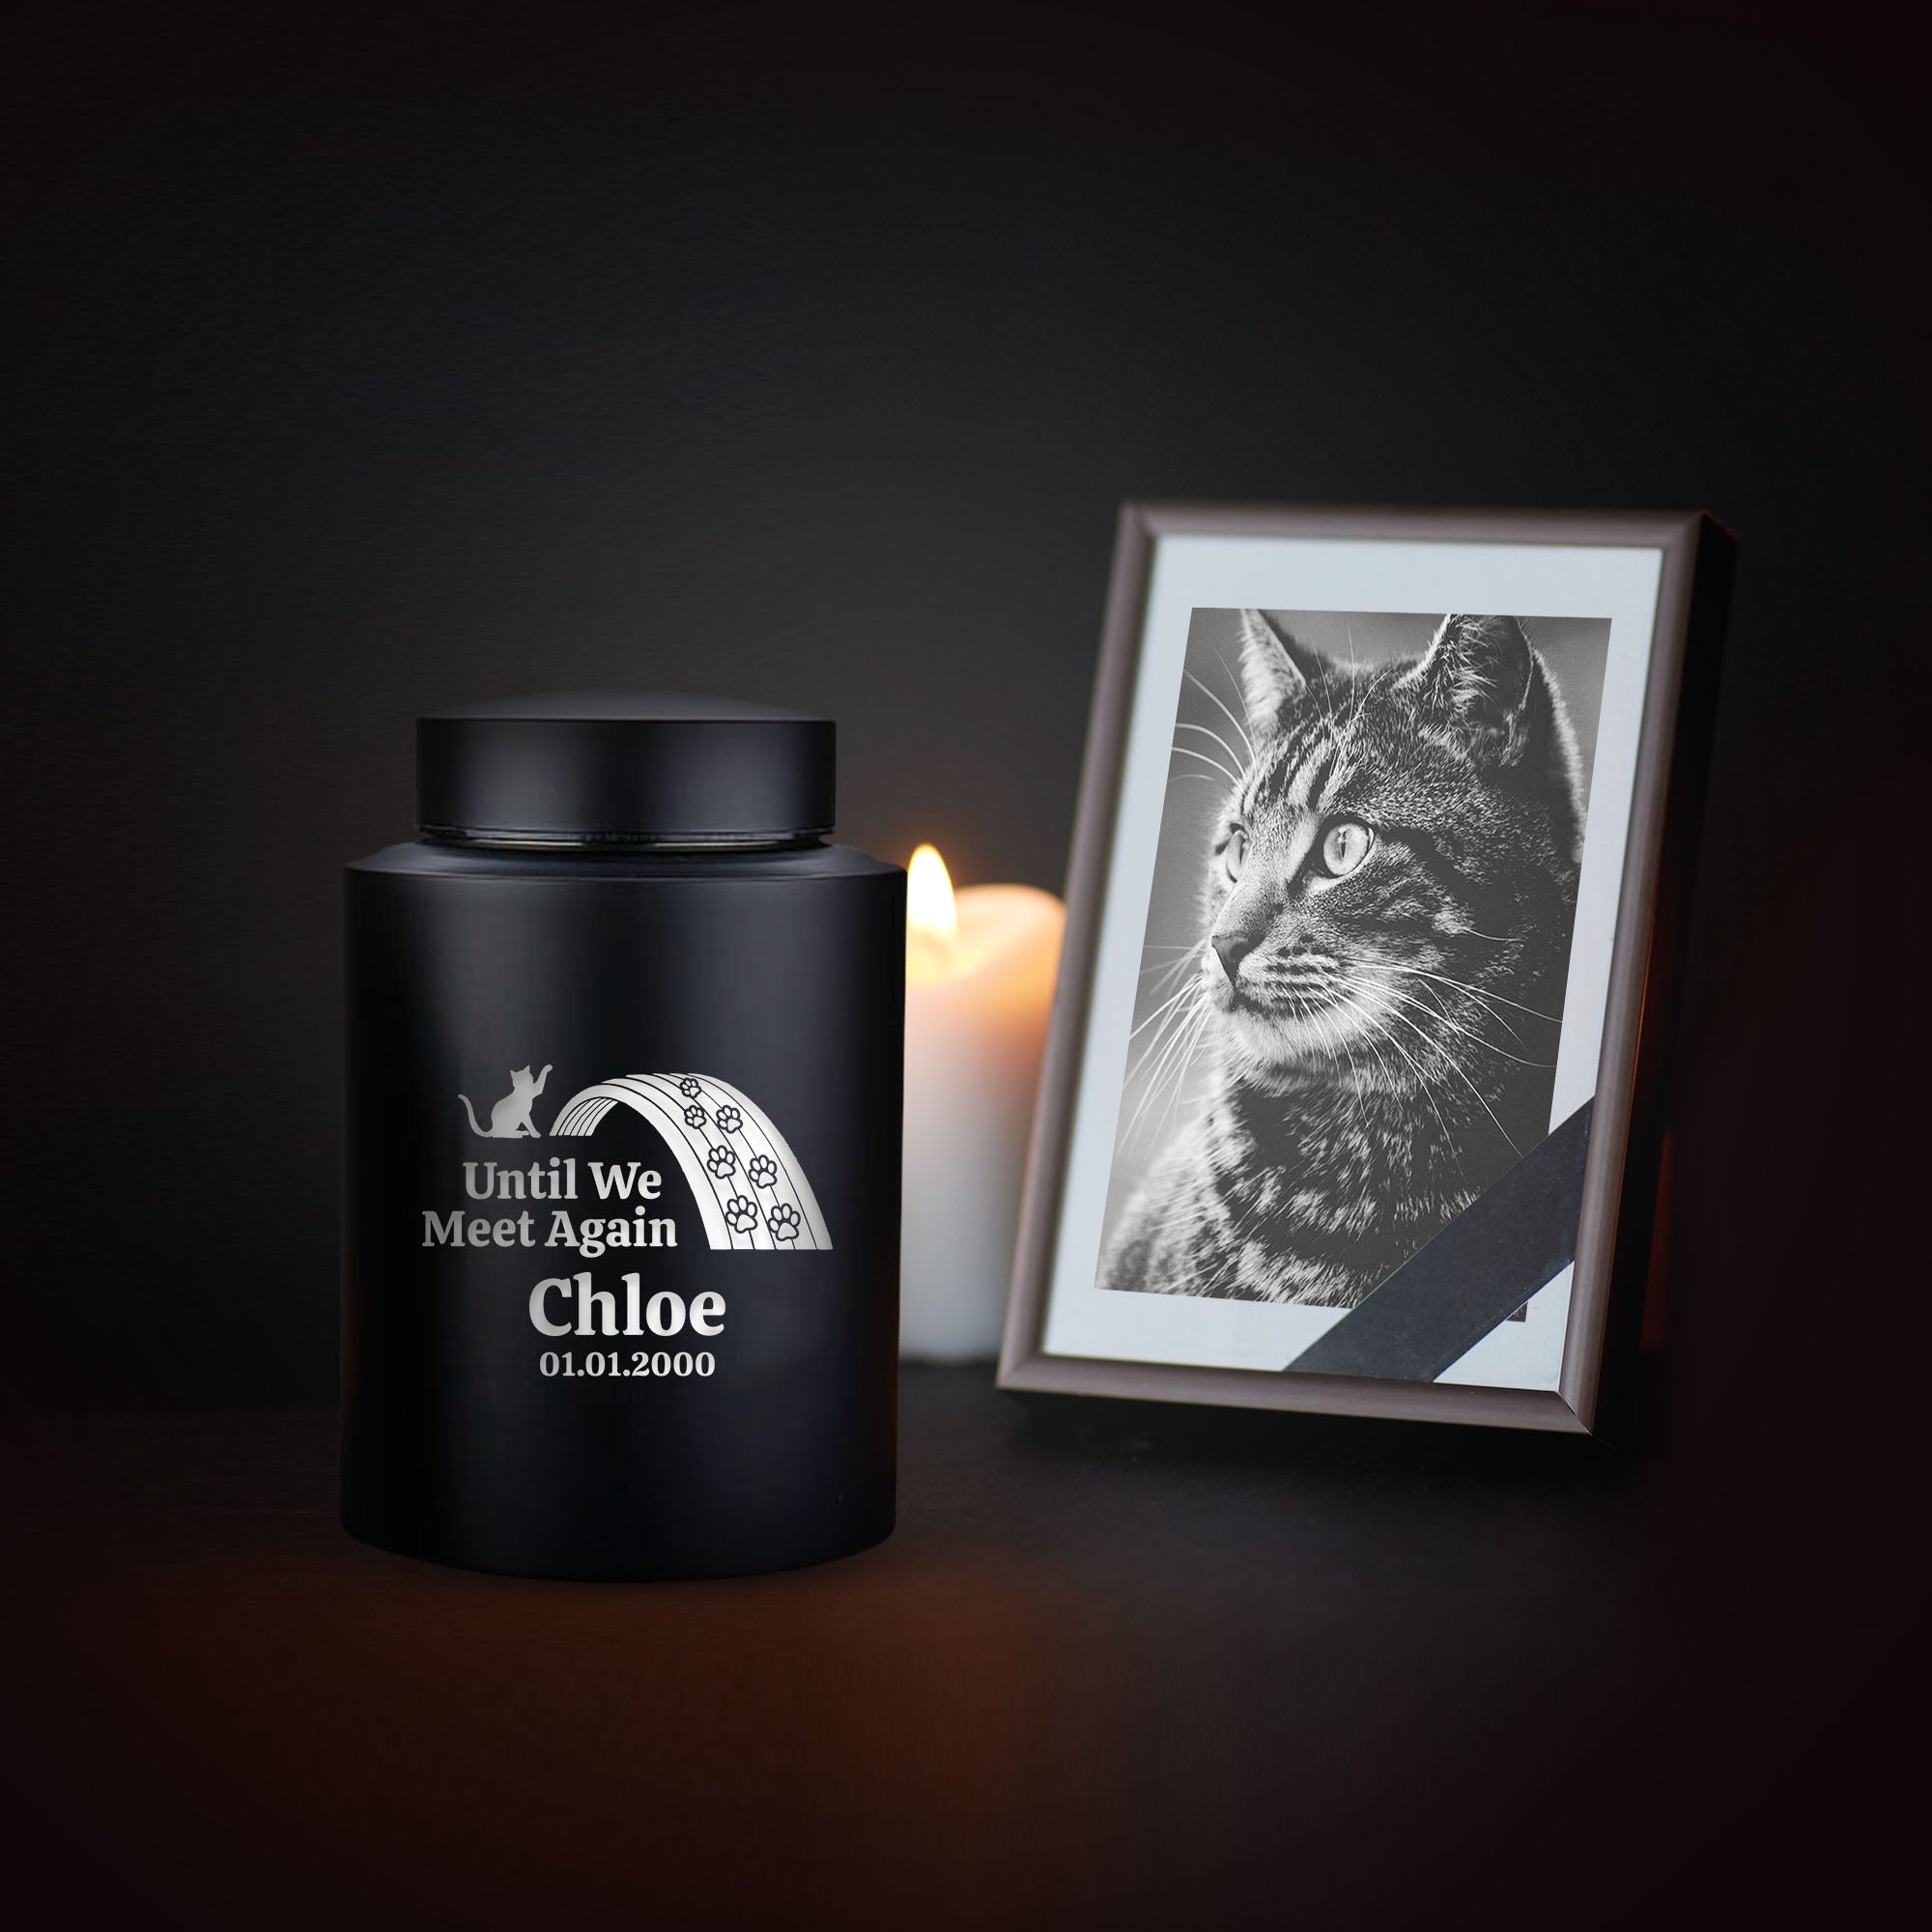 Personalized Custom Large Urn Pet Cat Cremation Urn Engraved with Name, Date and Text - Round Powder Coated Steel Urns for Cat Ashes, Pet Size 90-115 lbs